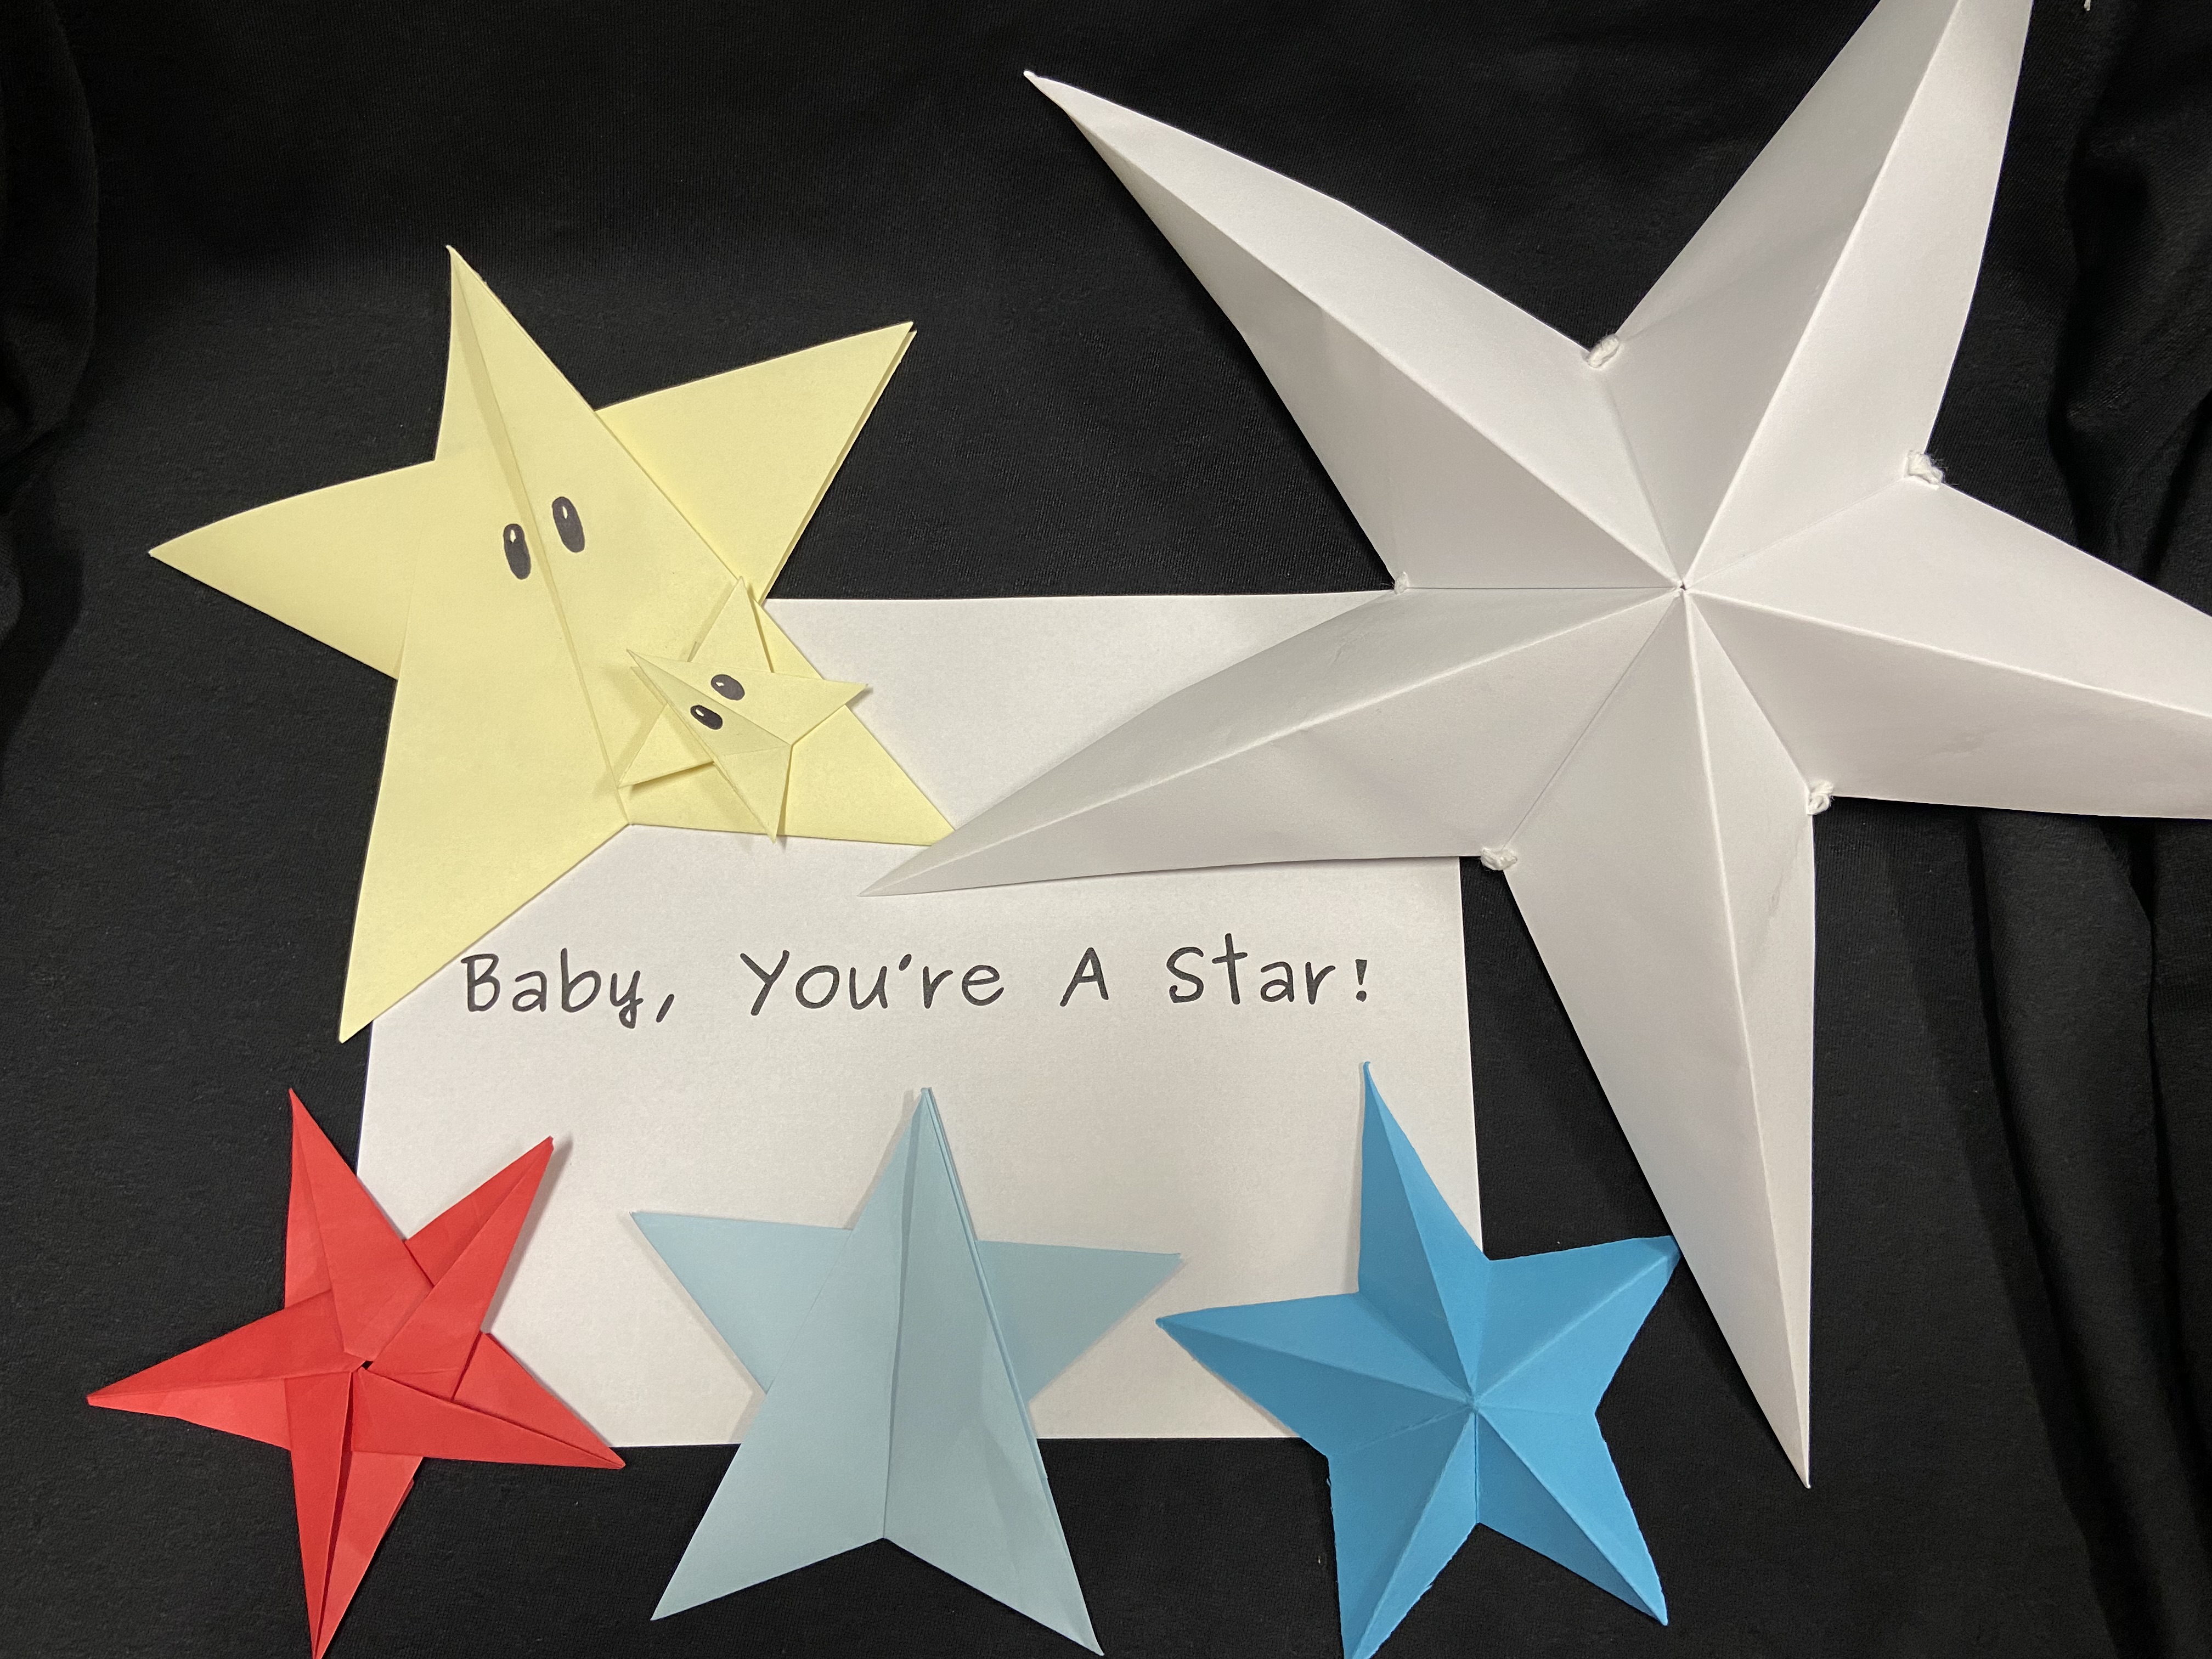 Decorative stars cut from colorful paper